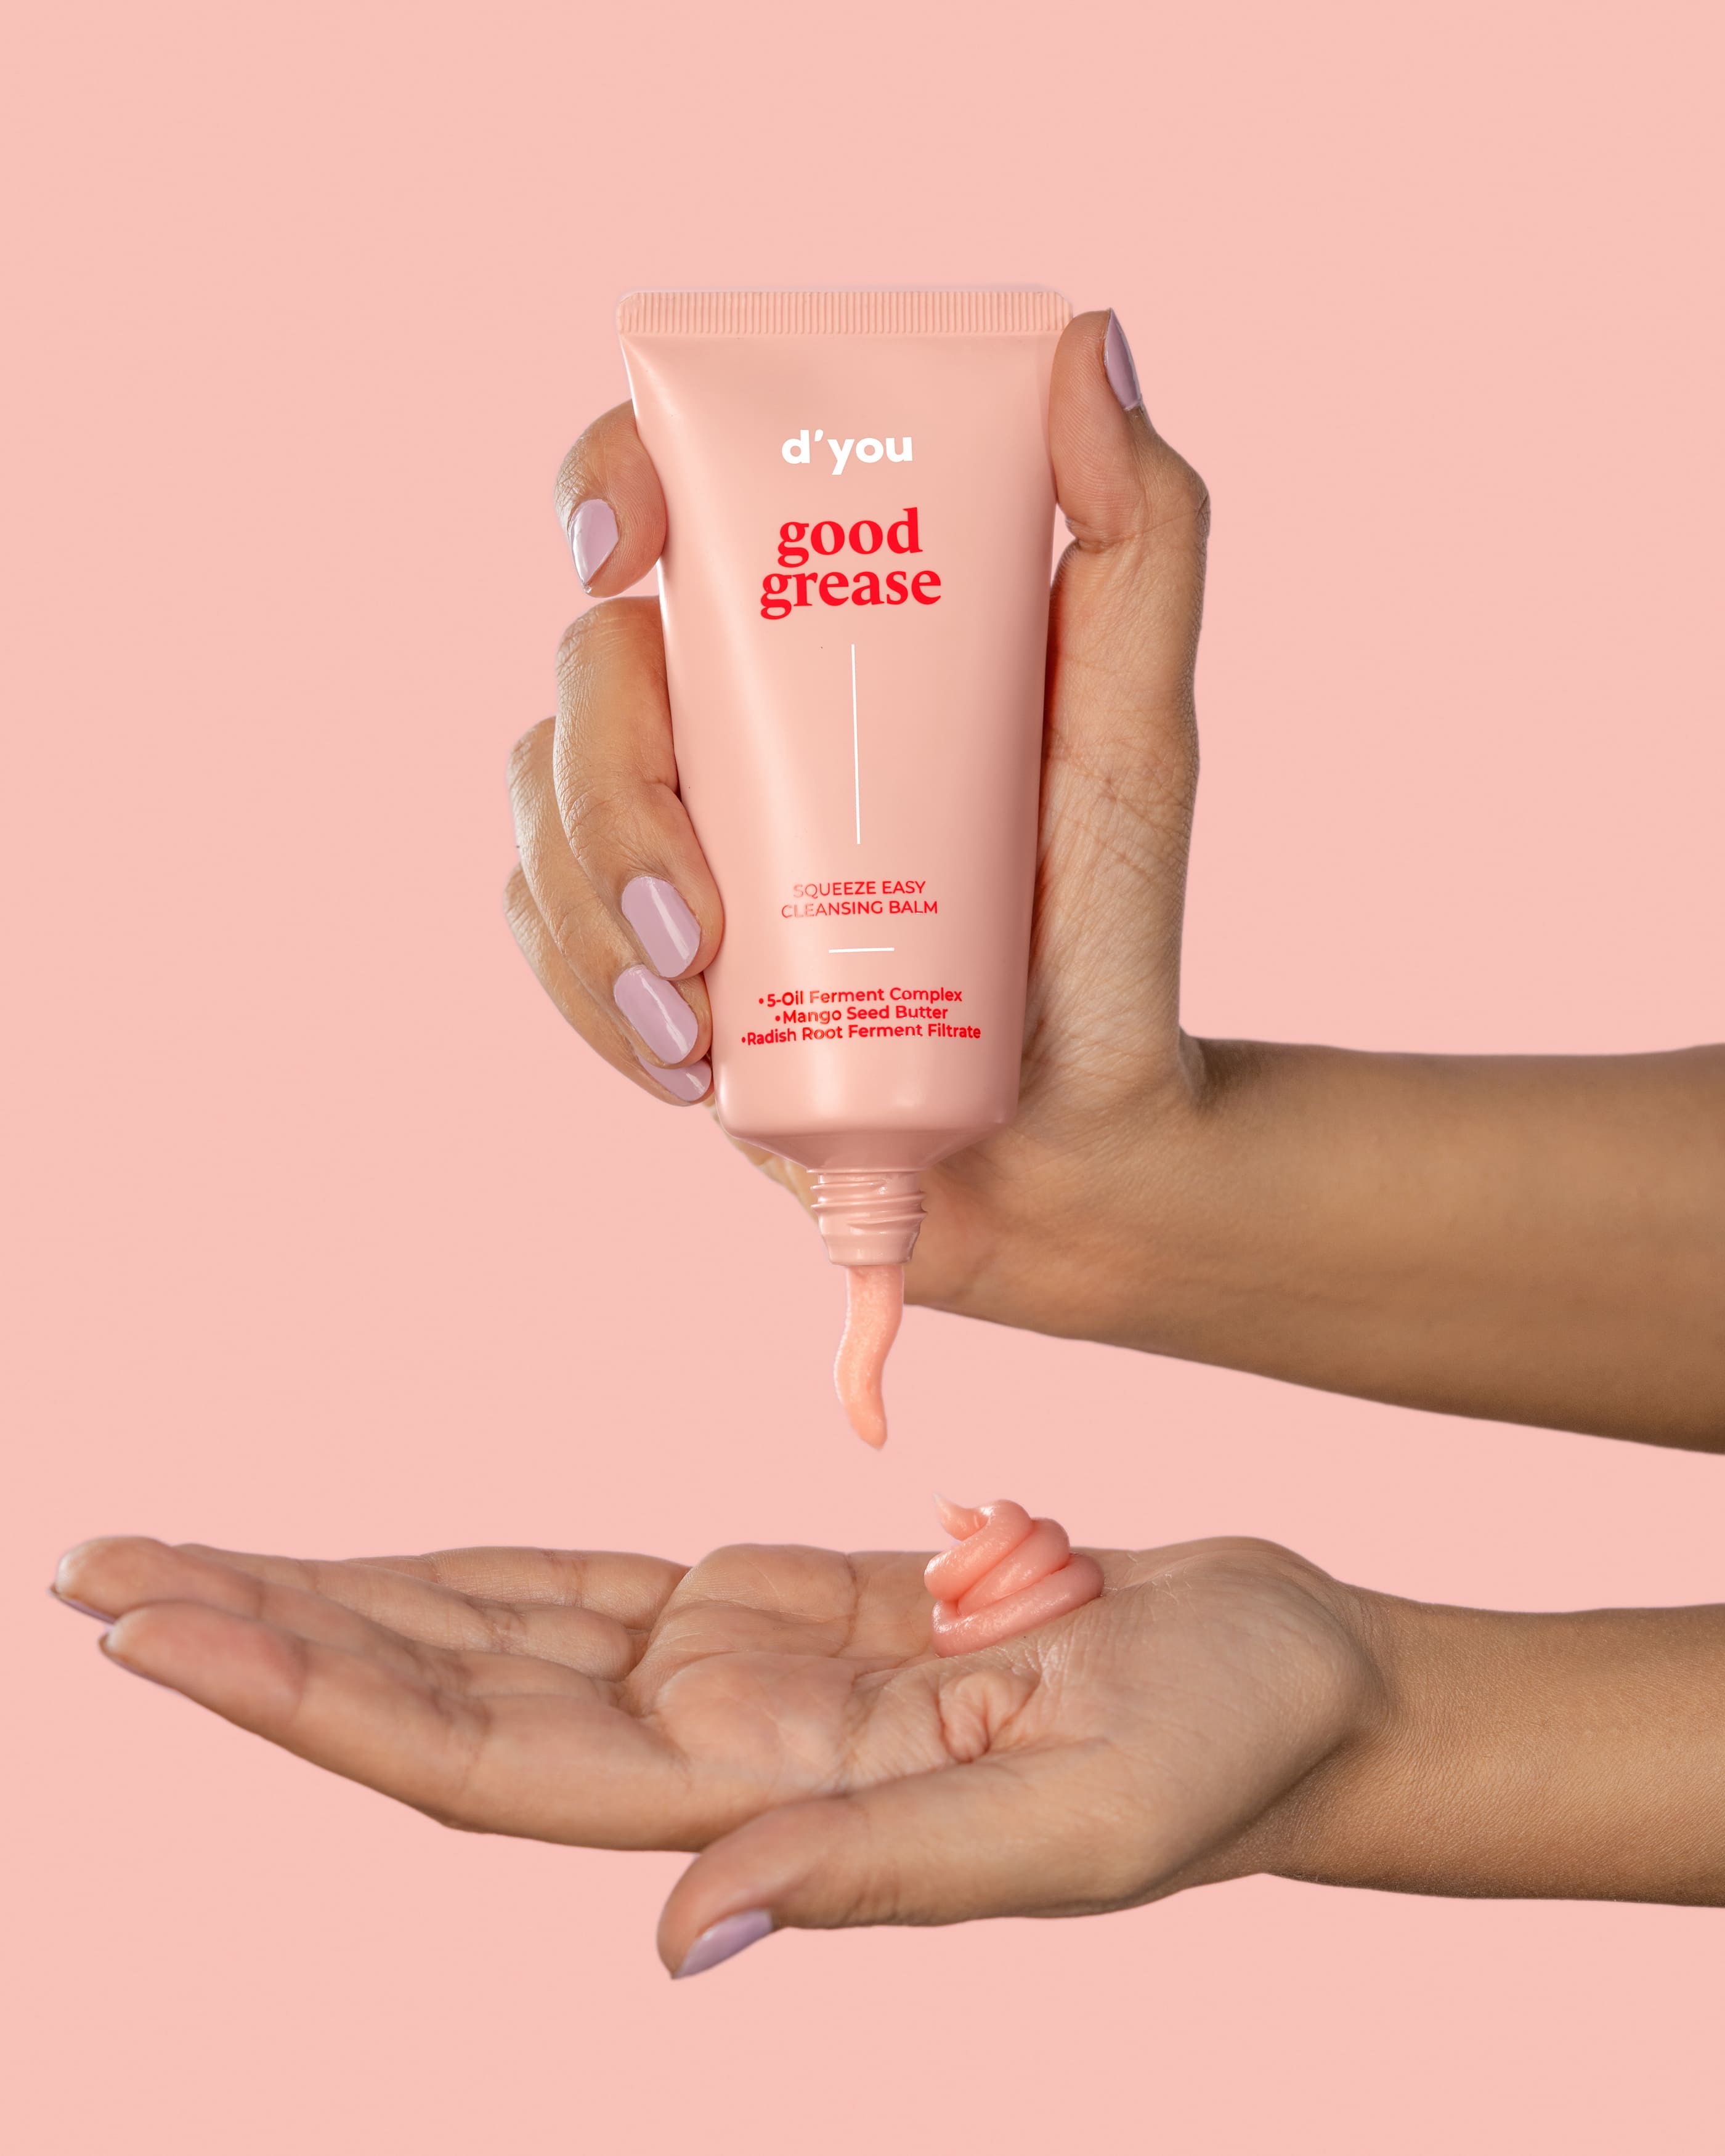 d’you announces the launch of good grease